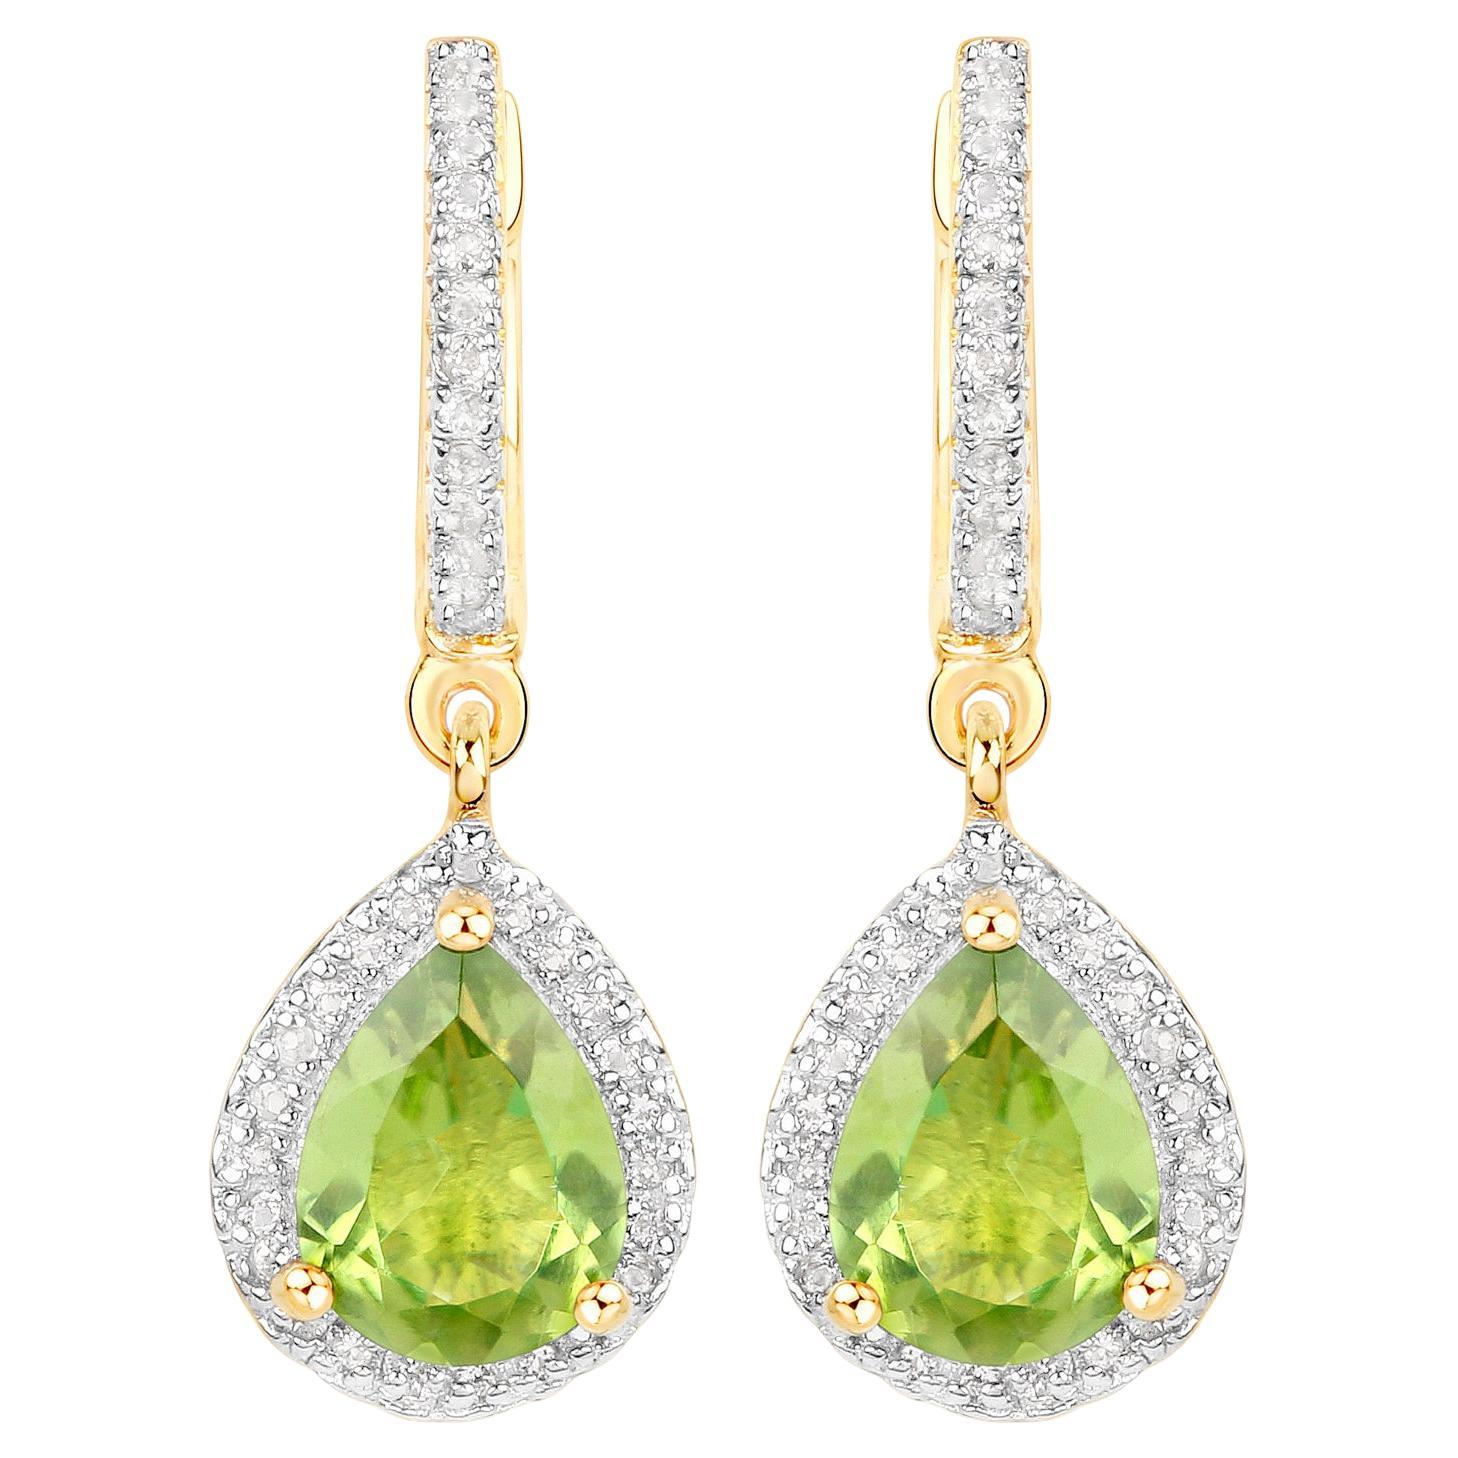 Natural Peridot Dangle Earrings White Topaz 2.16 Carats 18K Gold Plated Silver